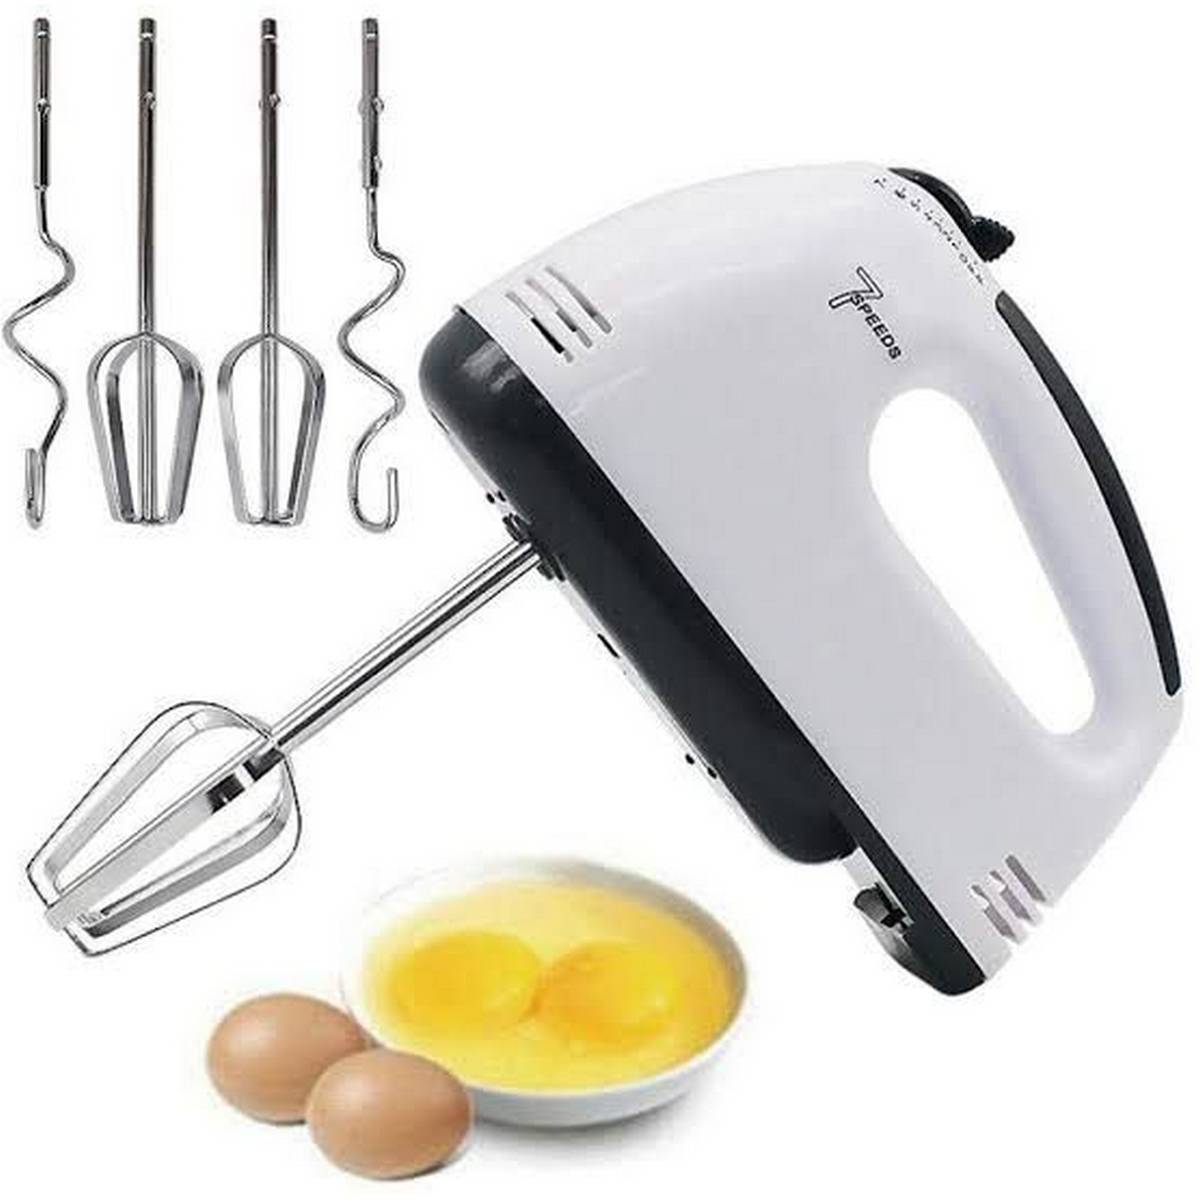 Egg Beater, Hand Mixer high speed 7 speed, hand mixer, Cream beater, liquid mixer machine, home appilances, kitchen accessories, egg beater, beating thing in easy way, dough mixer: Buy Online at Best